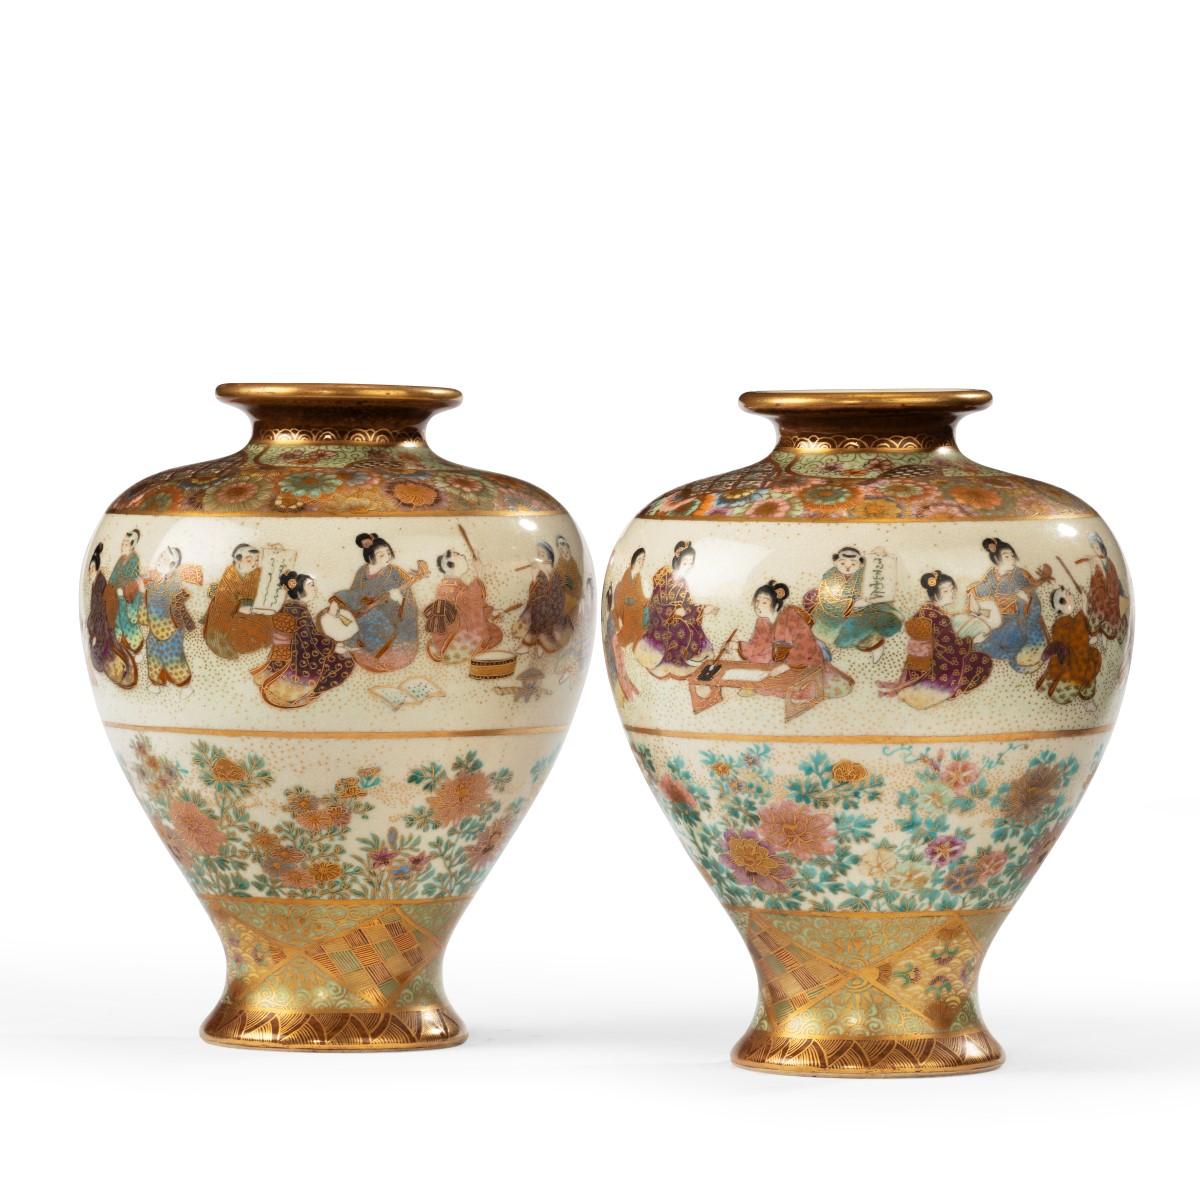 A pair of Satsuma earthenware vases